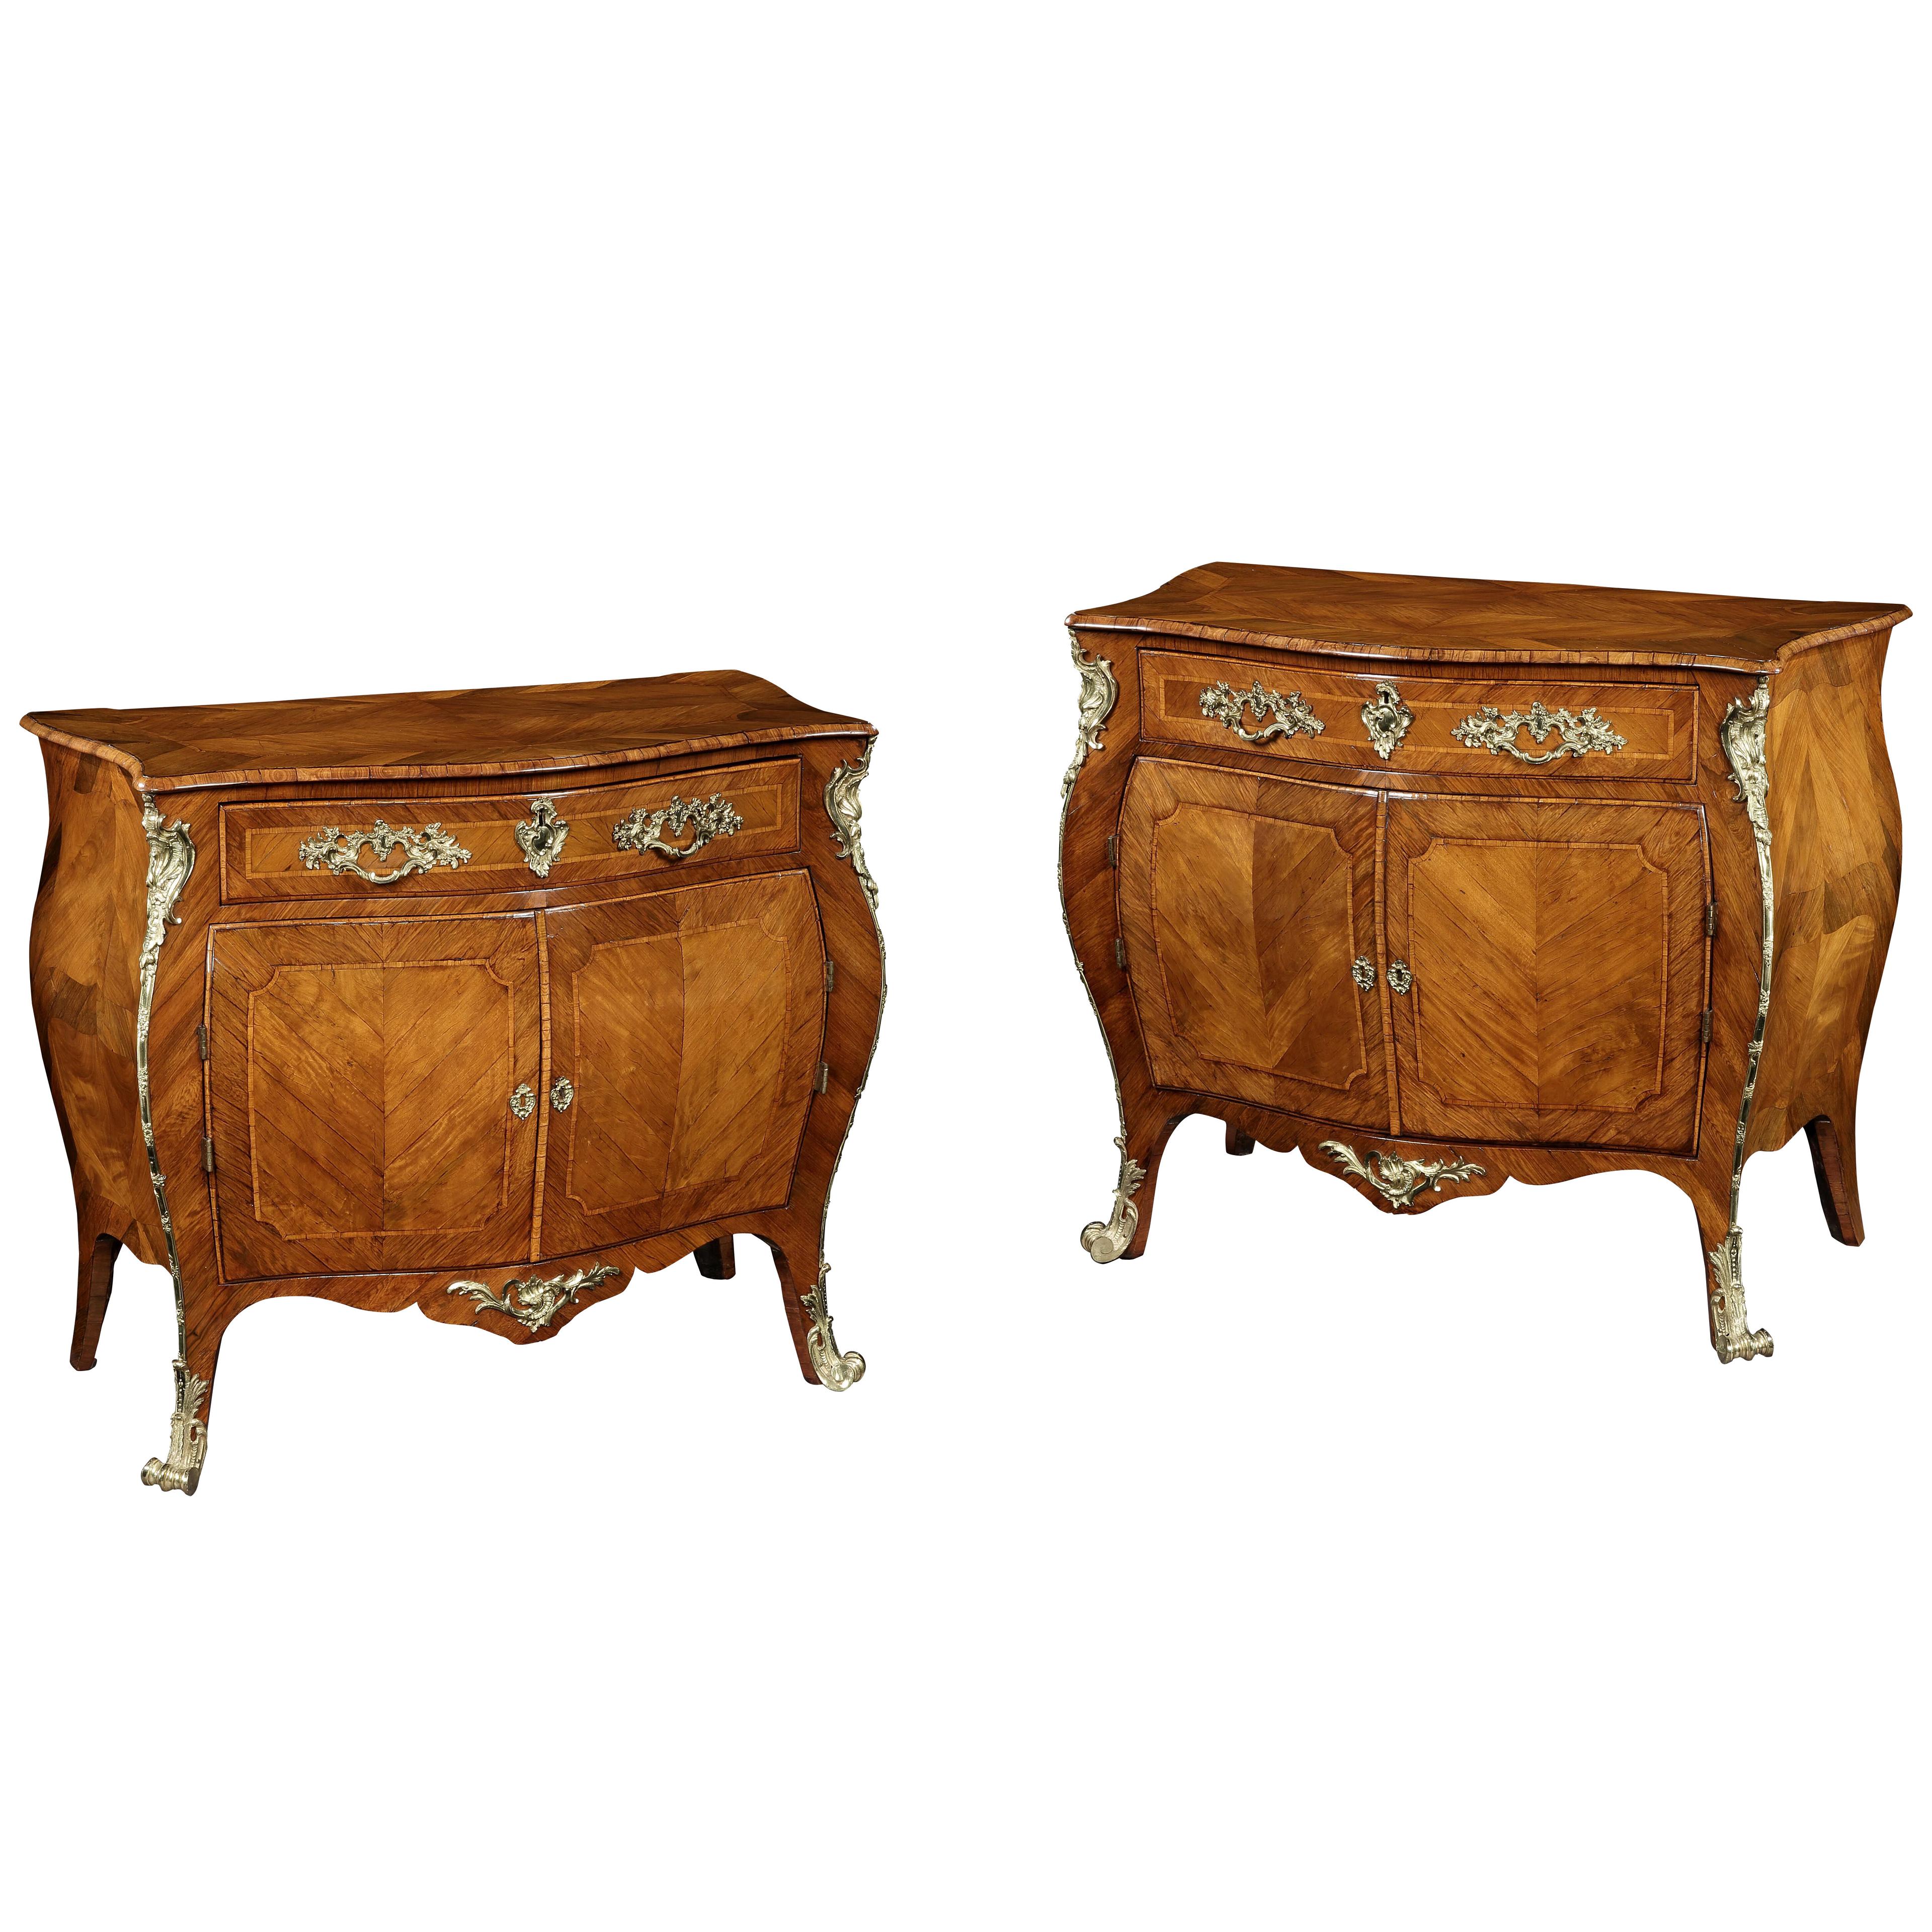  A PAIR OF BOMBE COMMODES